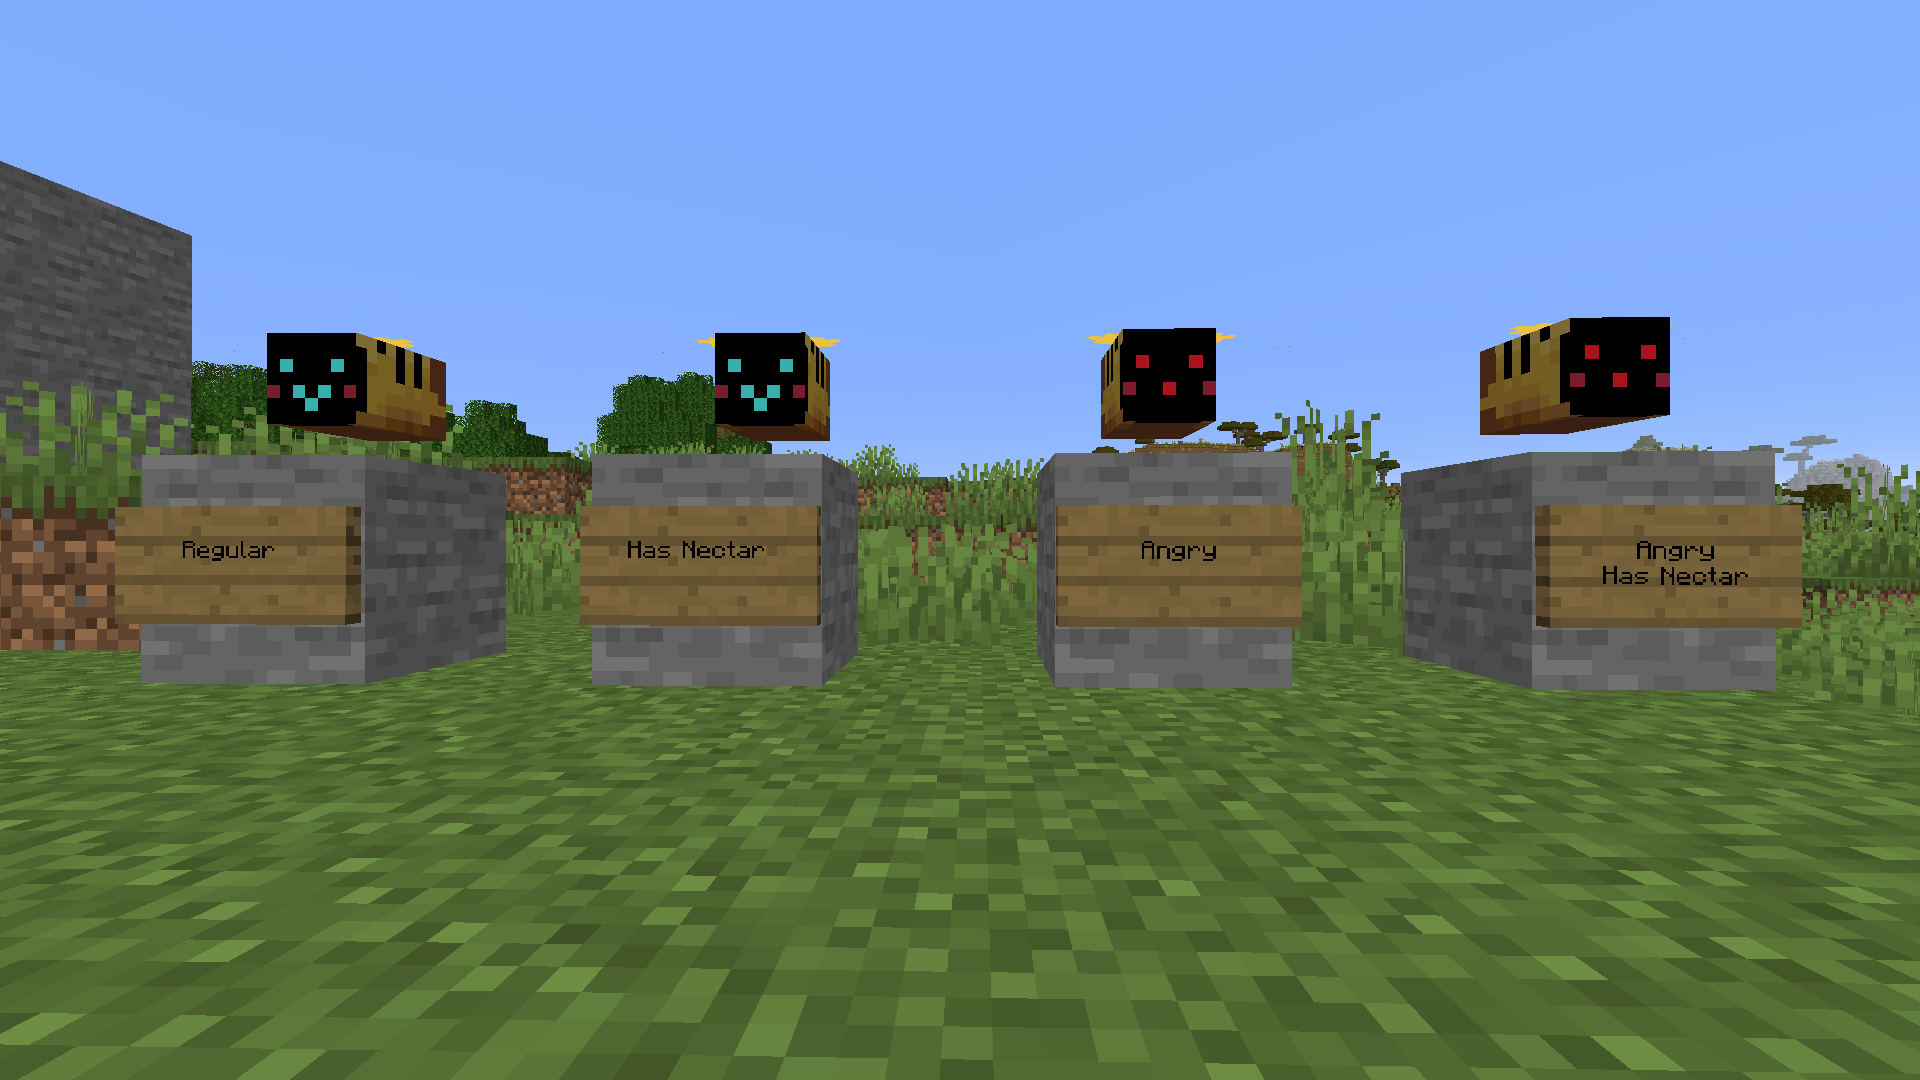 I retextured Minecraft bees to be Drones. I'm not the best, but I